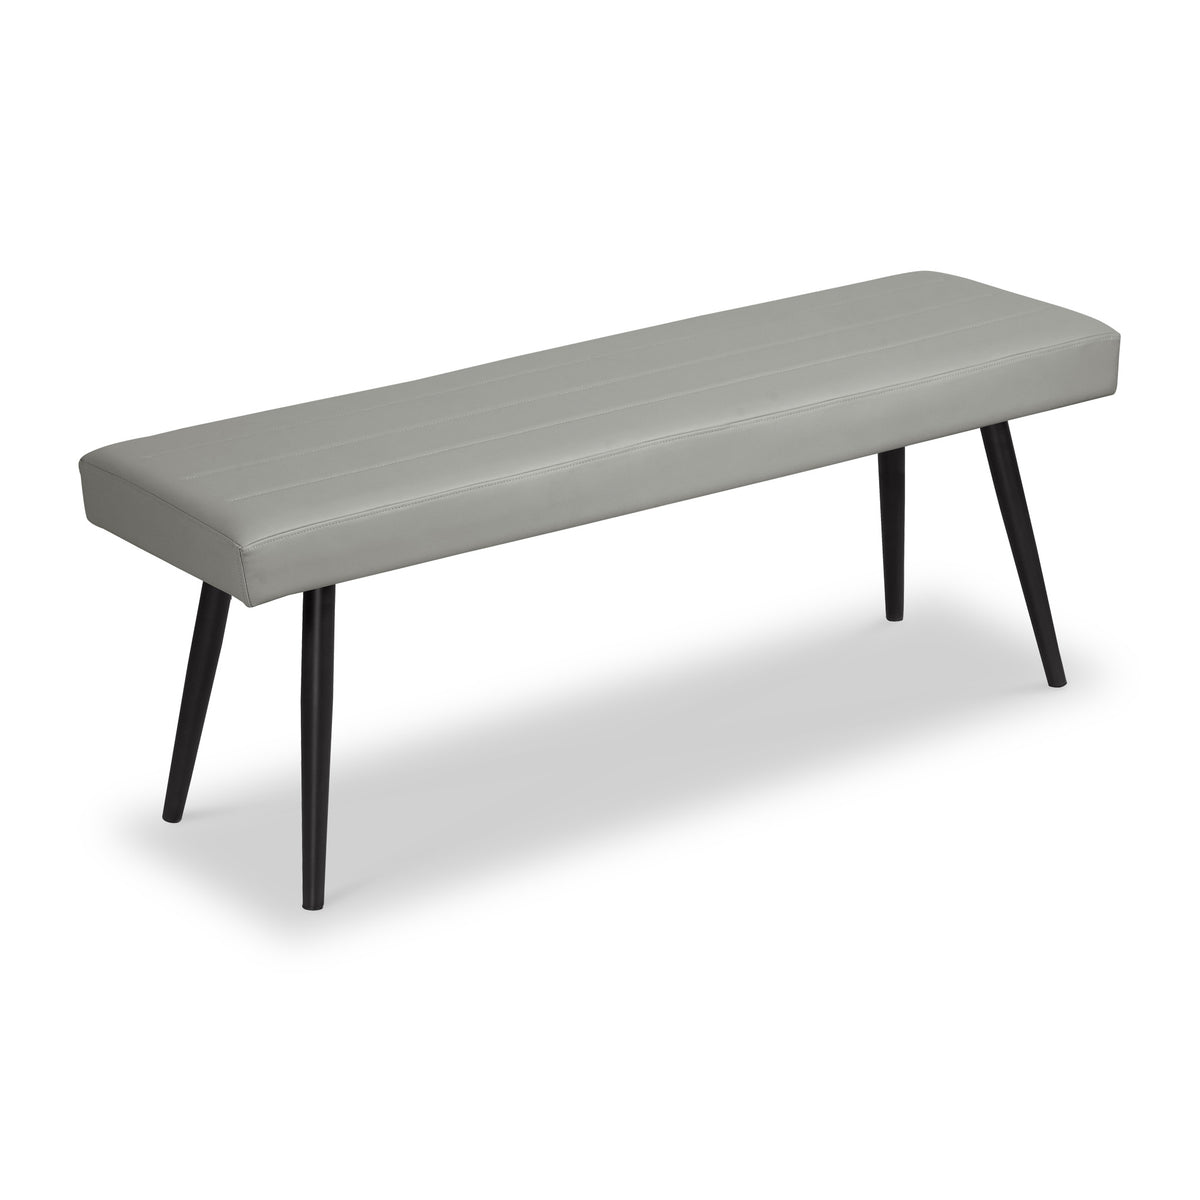 Whitstone Light Grey Faux Leather Dining Bench from Roseland Furniture